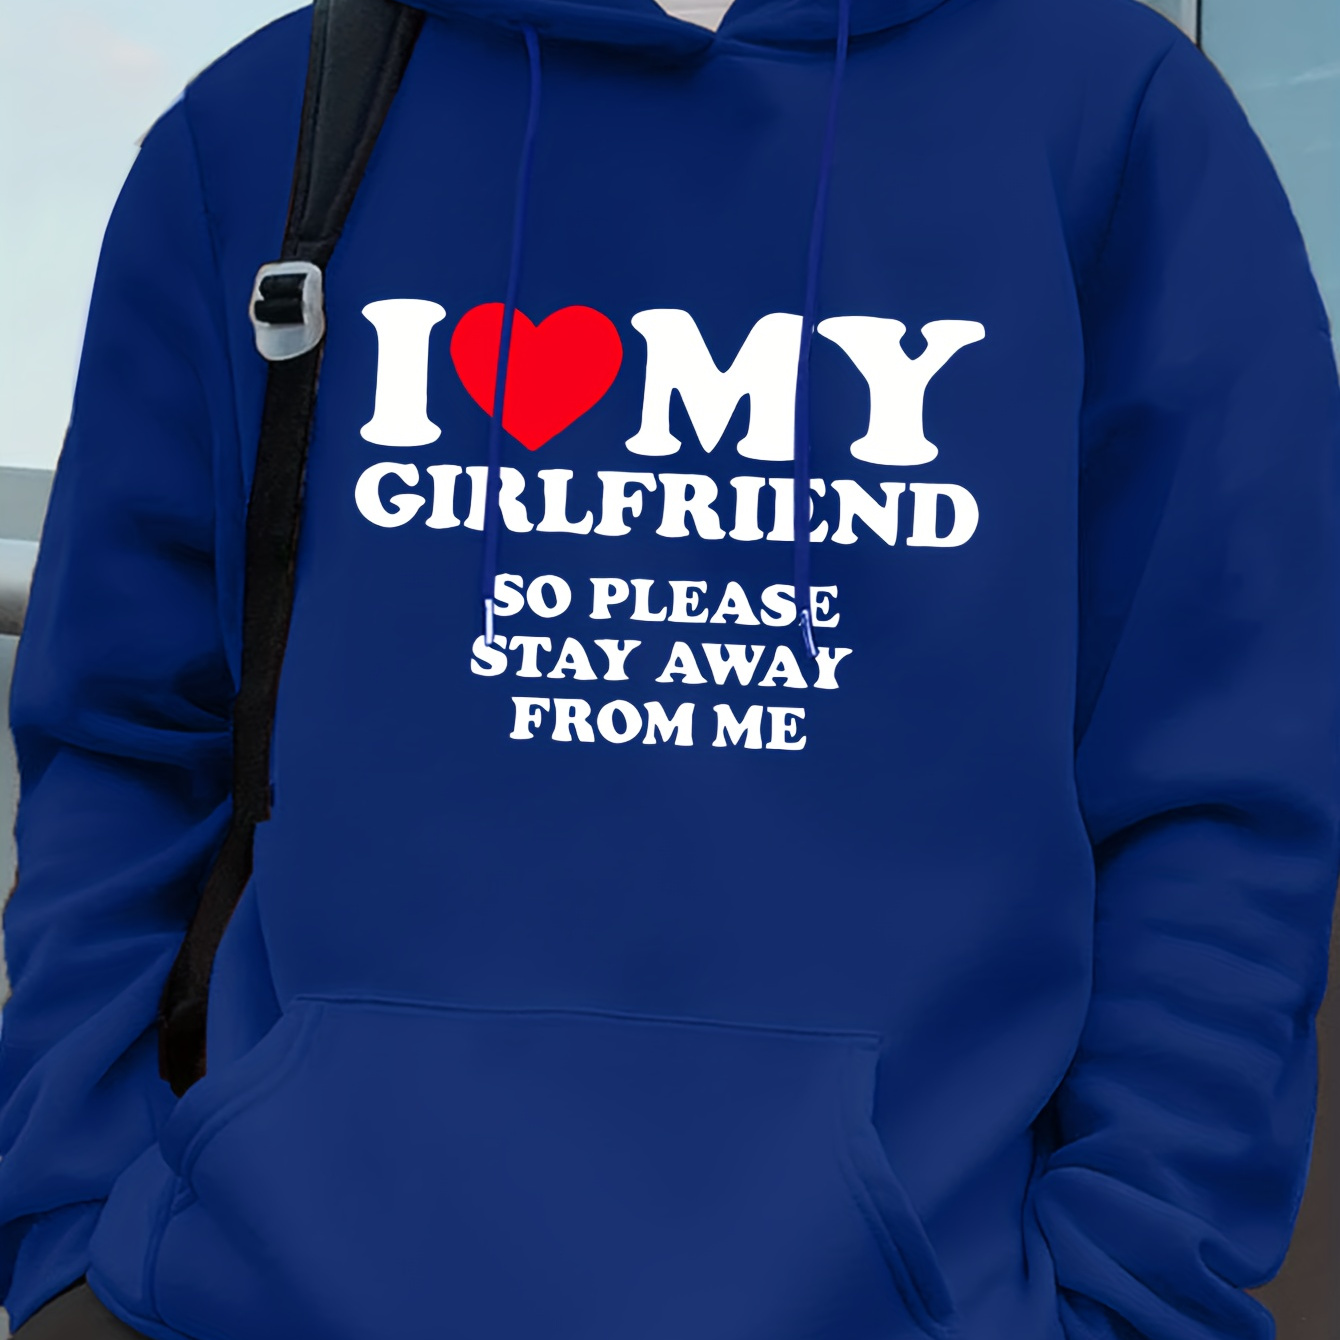 

I Love My Girlfriend Print Hoodie, Cool Hoodies For Men, Men's Casual Graphic Design Pullover Hooded Sweatshirt With Kangaroo Pocket Streetwear For Winter Fall, As Gifts